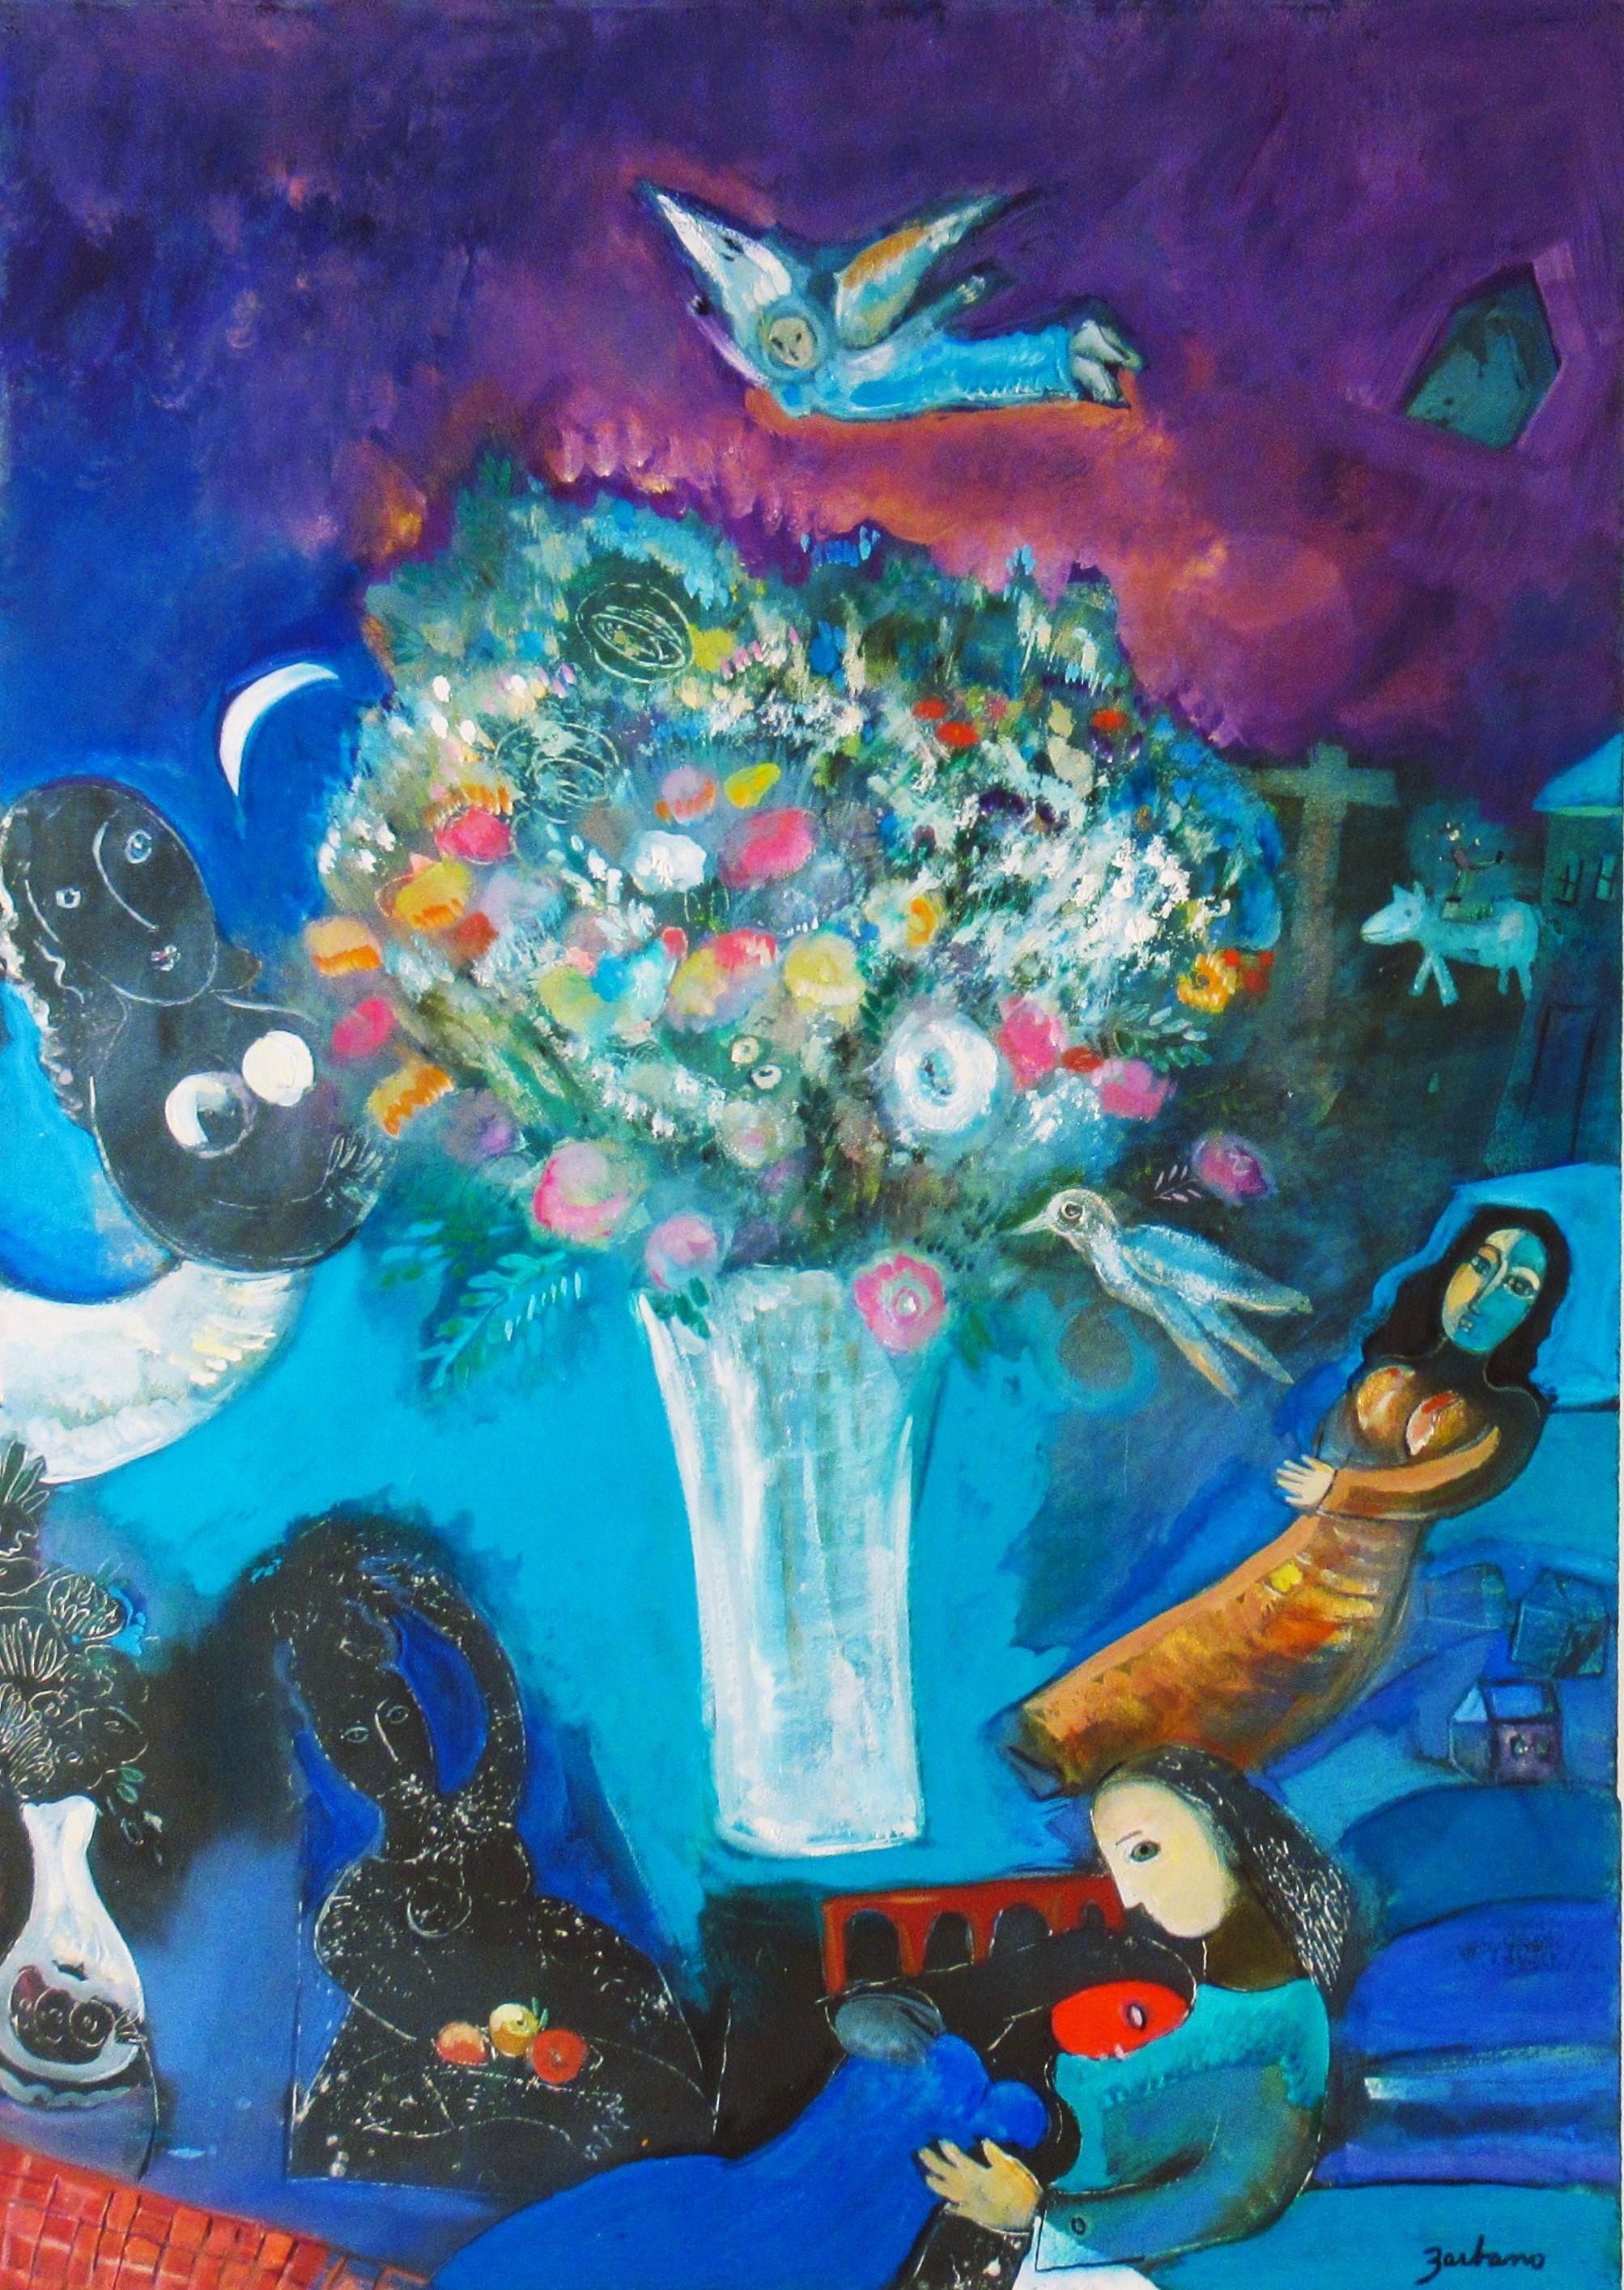 Flowers with Personages - Painting by Mary Zarbano